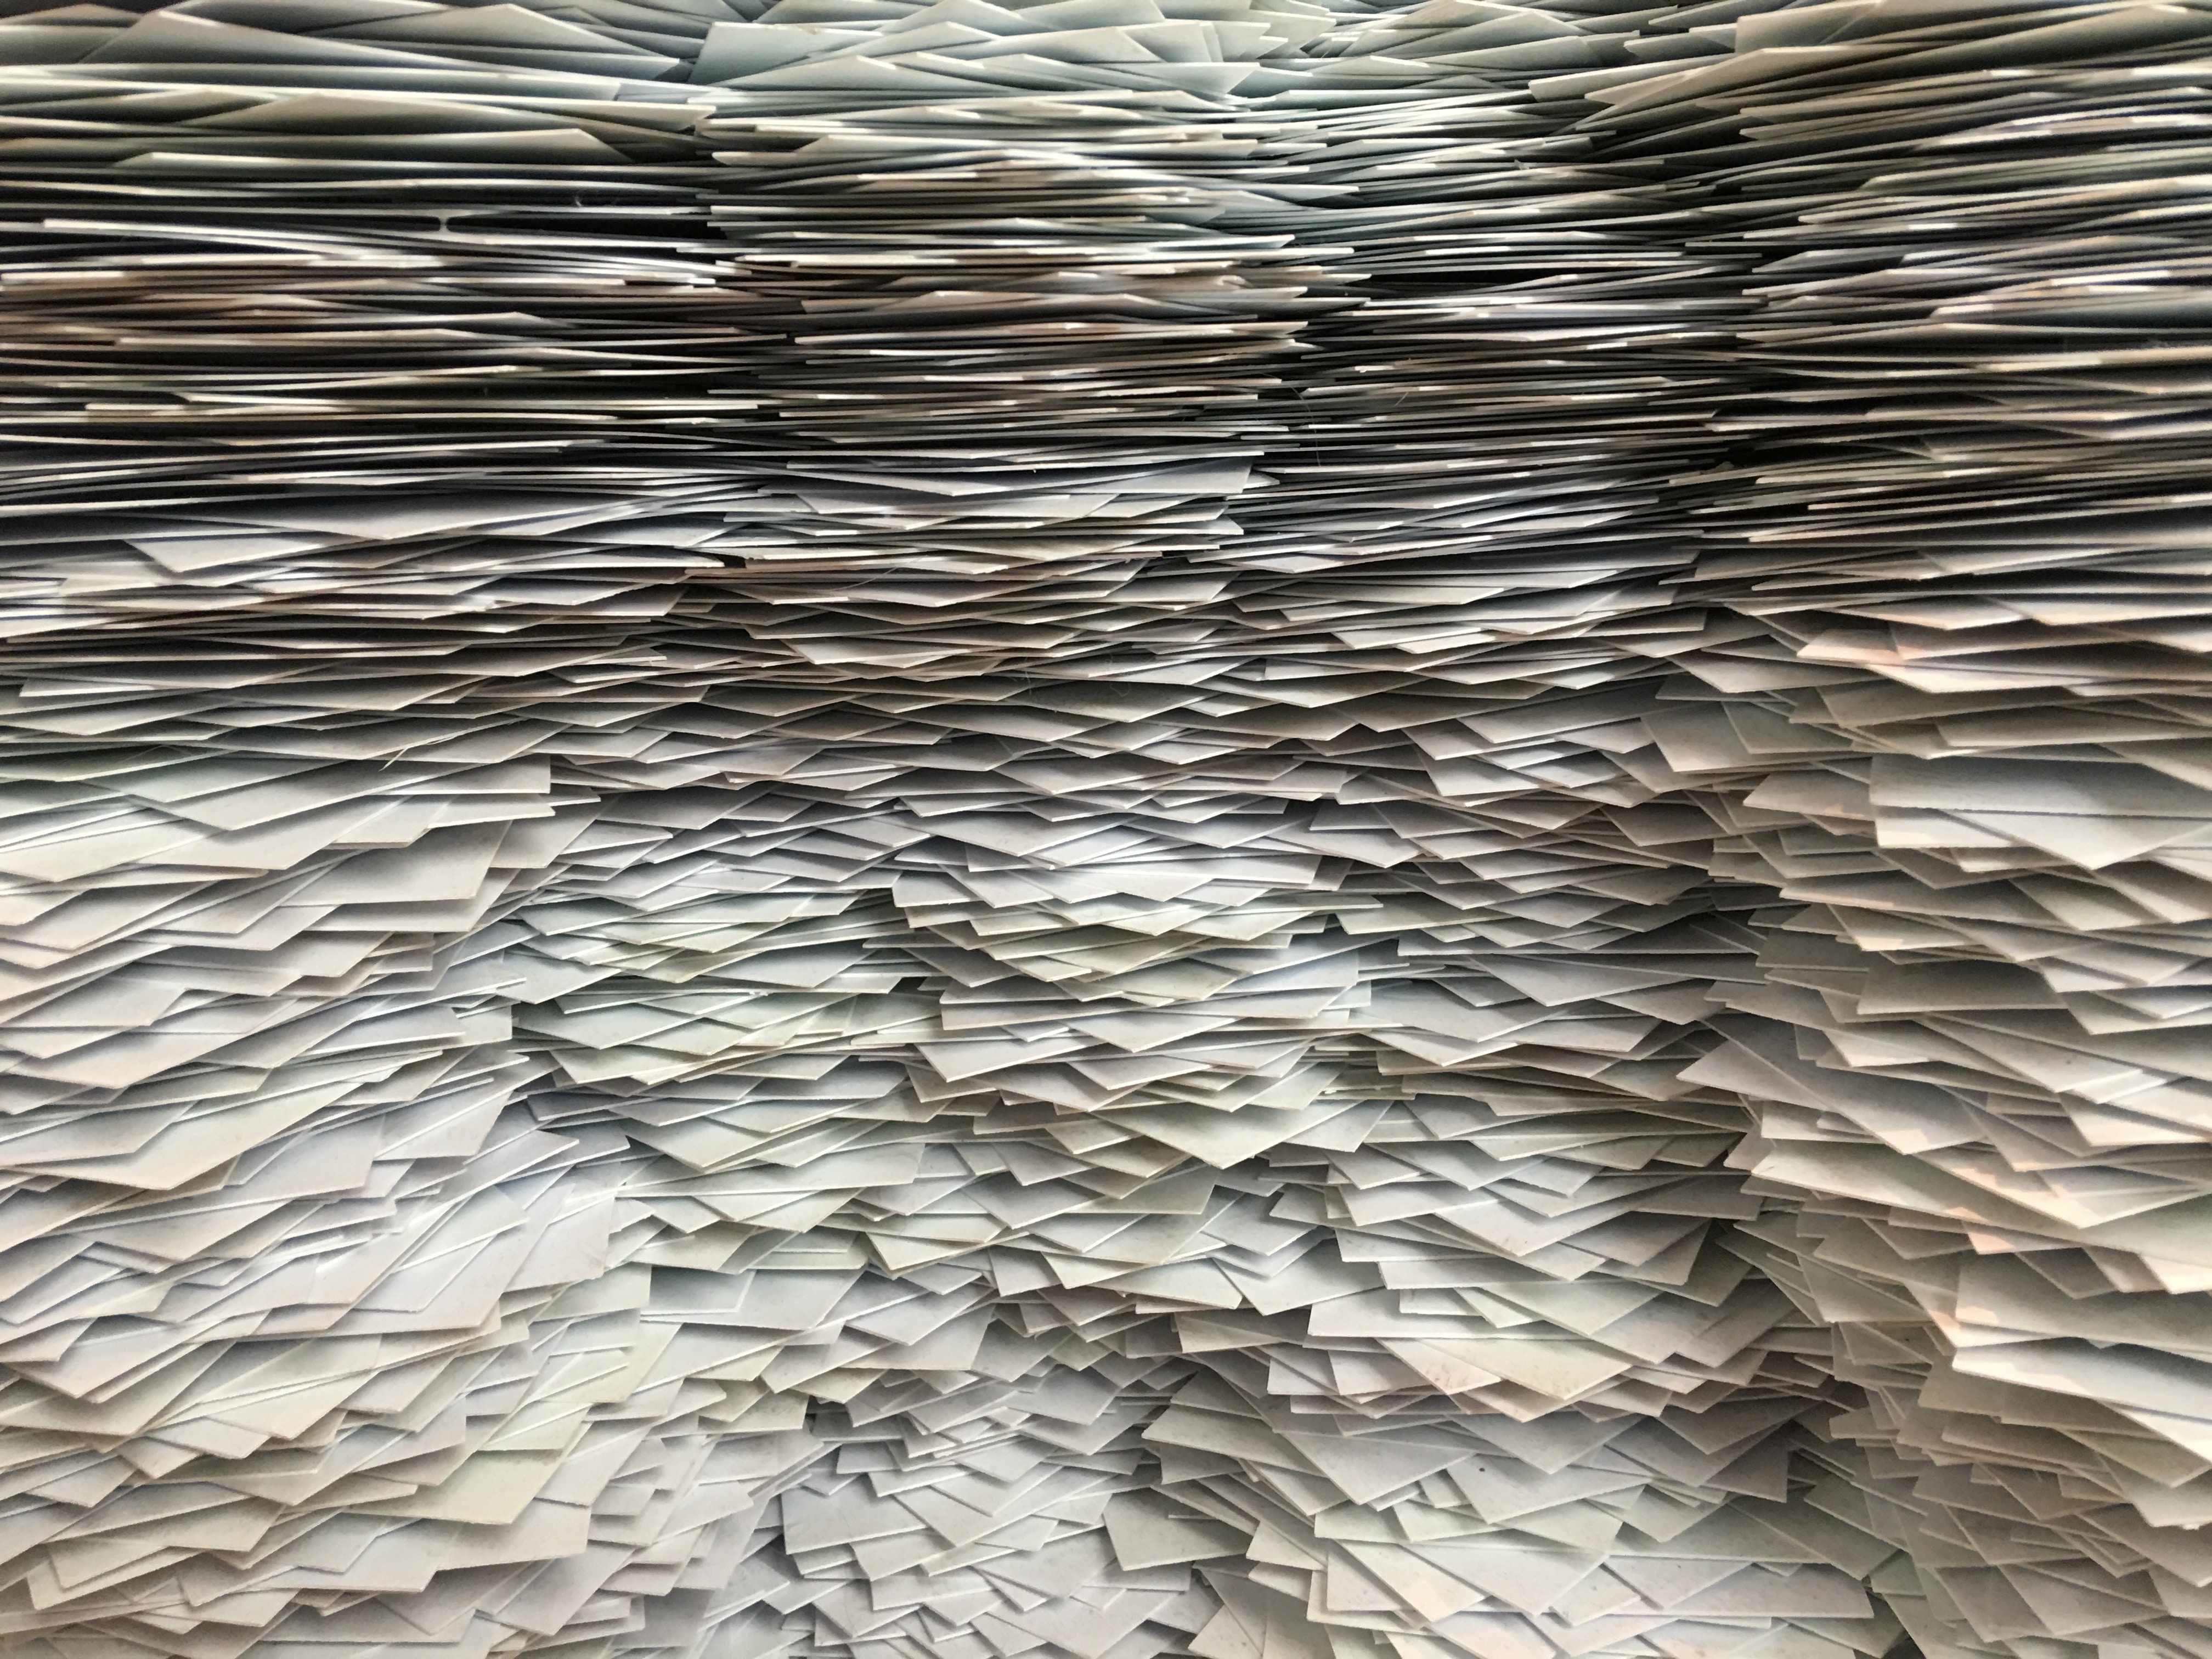 Stacks upon stacks of papers in rows